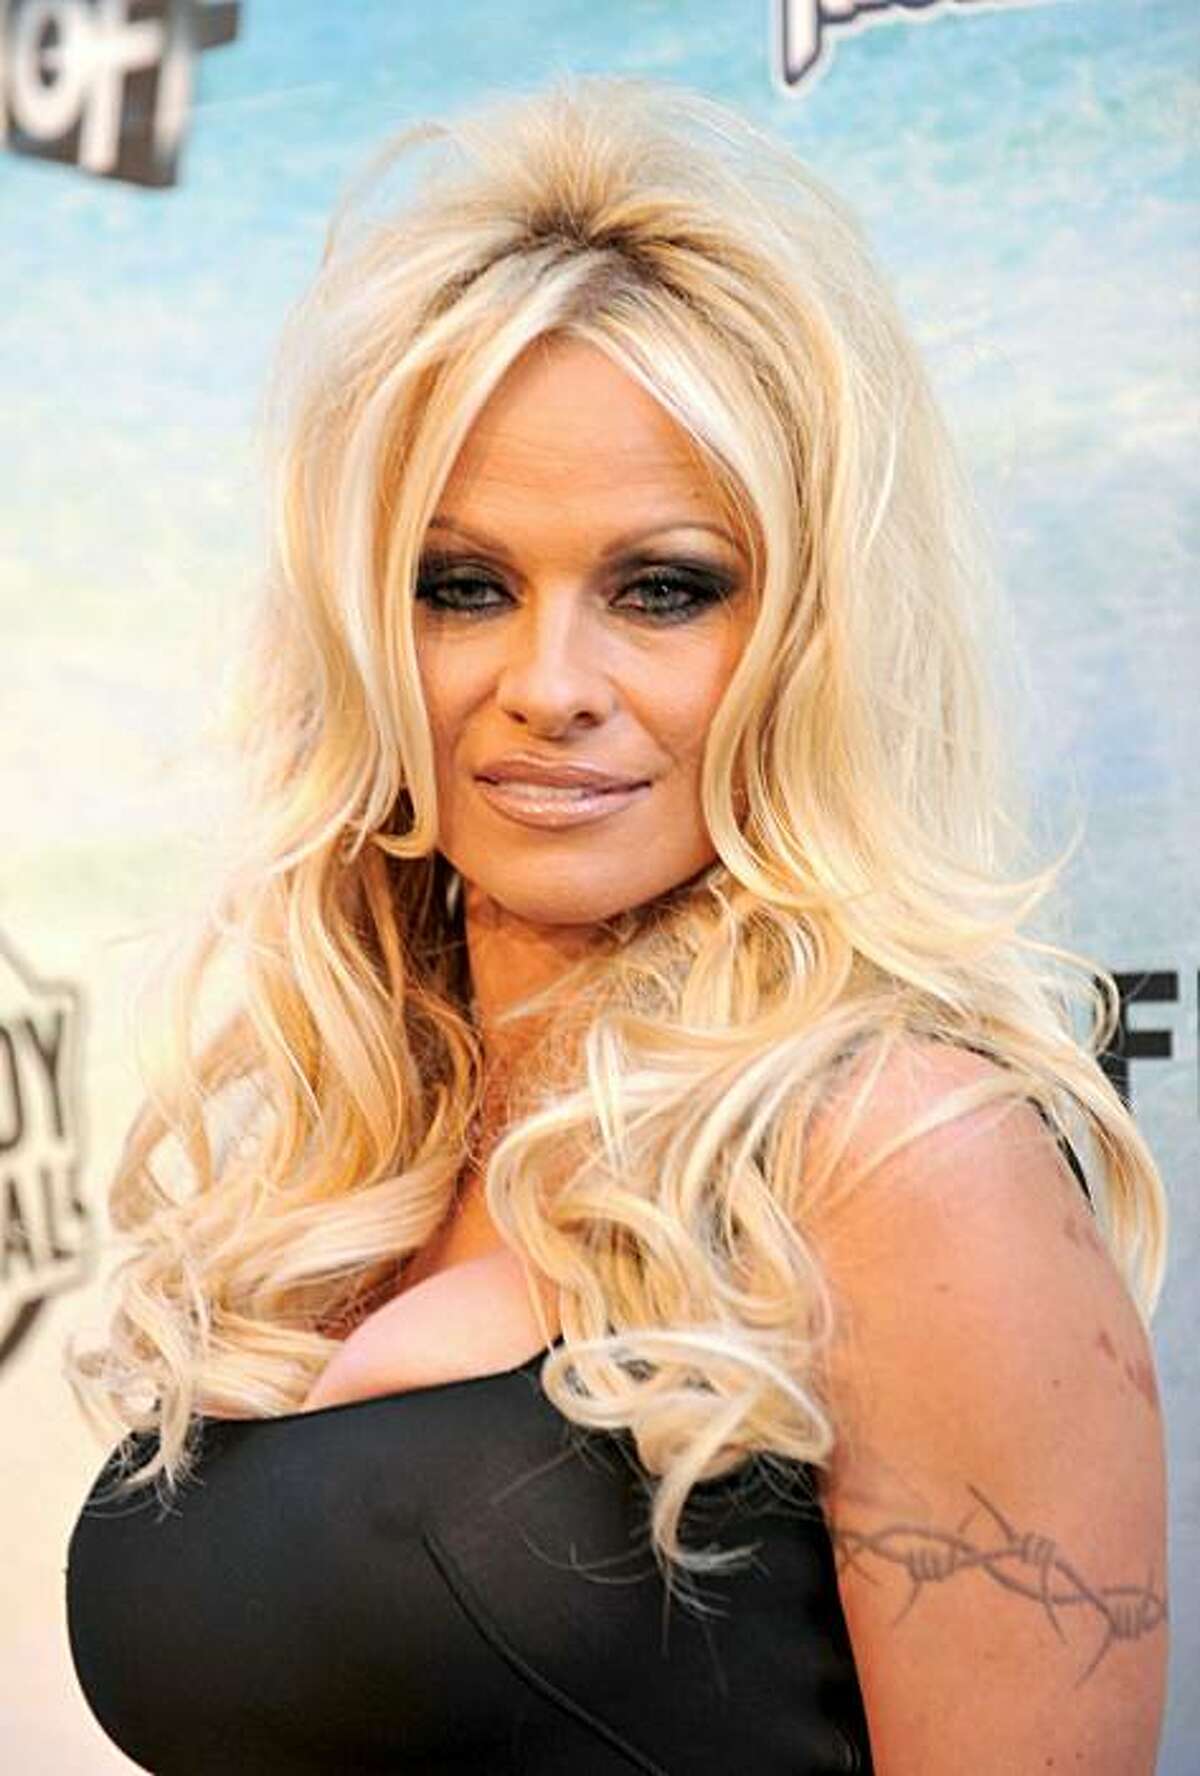 CULVER CITY, CA - AUGUST 01: Actress Pamela Anderson arrives at the Comedy Central Roast Of David Hasselhoff held at Sony Pictures Studios on August 1, 2010 in Culver City, California. The "Comedy Central Roast of David Hasselhoff" will air on Sunday, August 15, 2010 at 10:00 p.m. ET/PT.